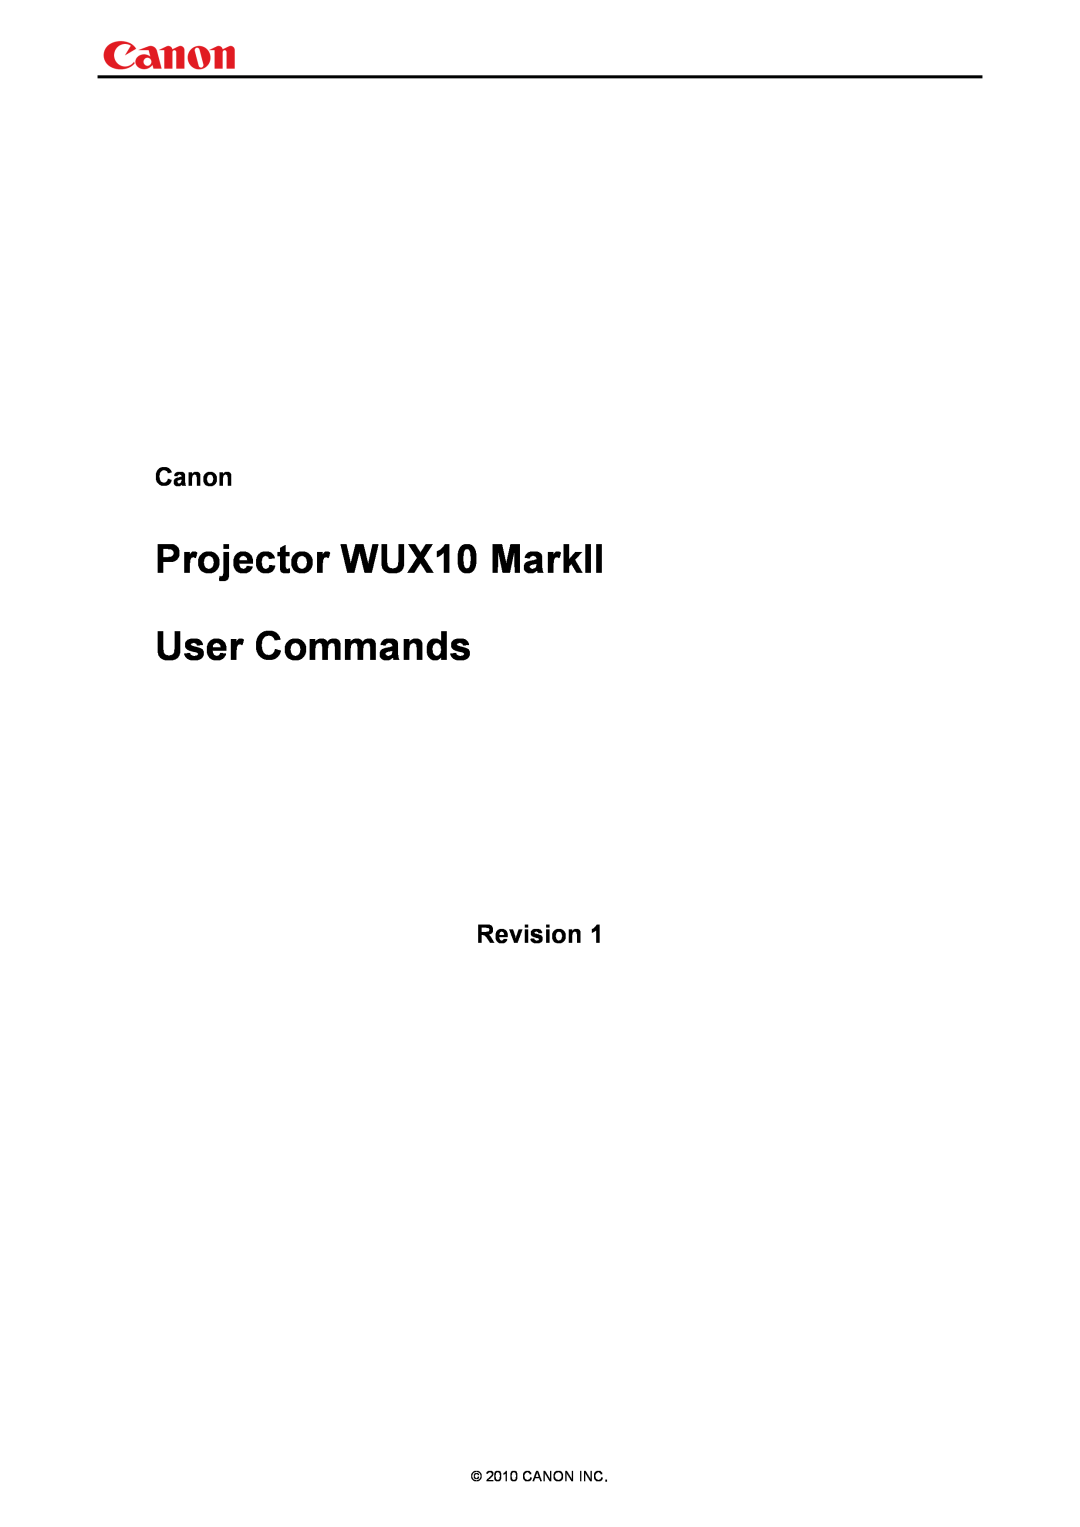 Canon manual Canon, Revision, Projector WUX10 MarkII User Commands 